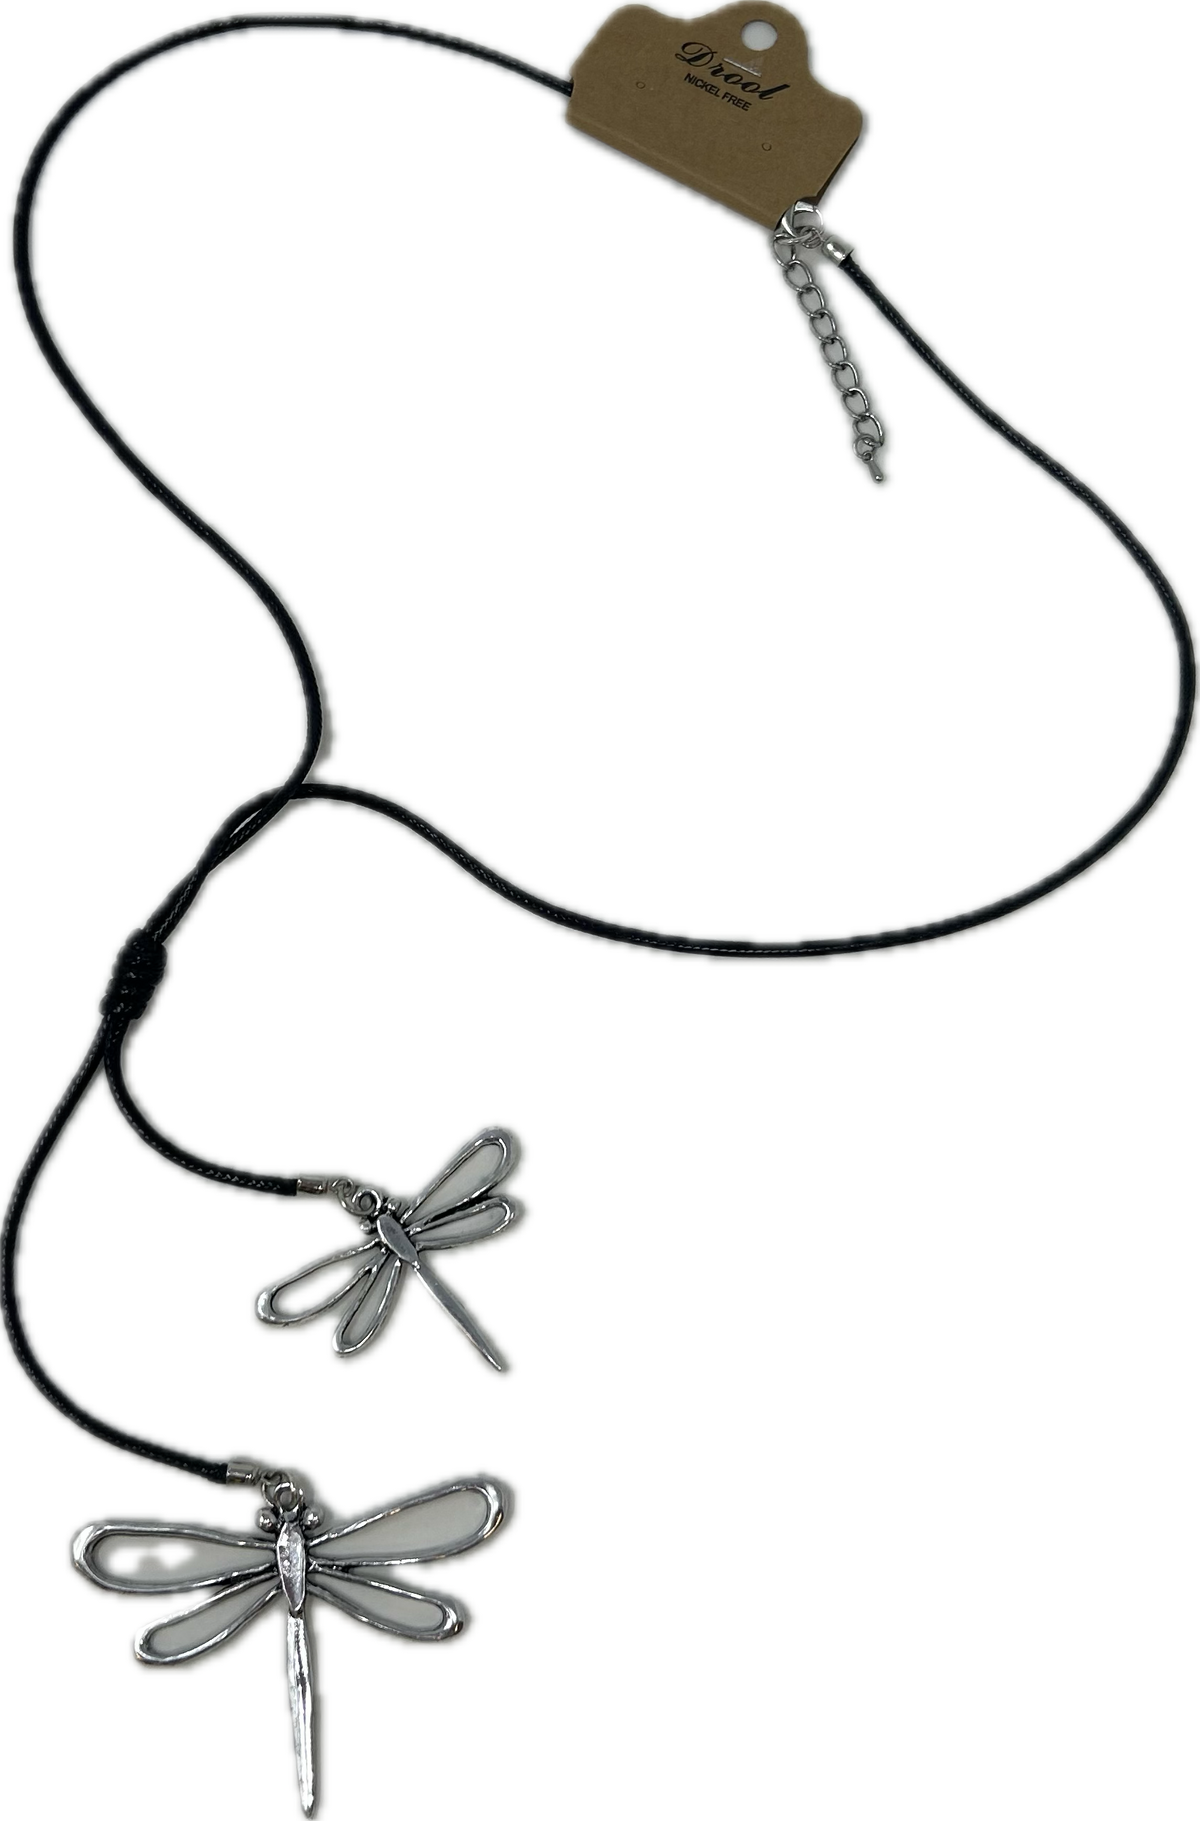 Black Corded Necklace w/ Double Dragonfly Pendant